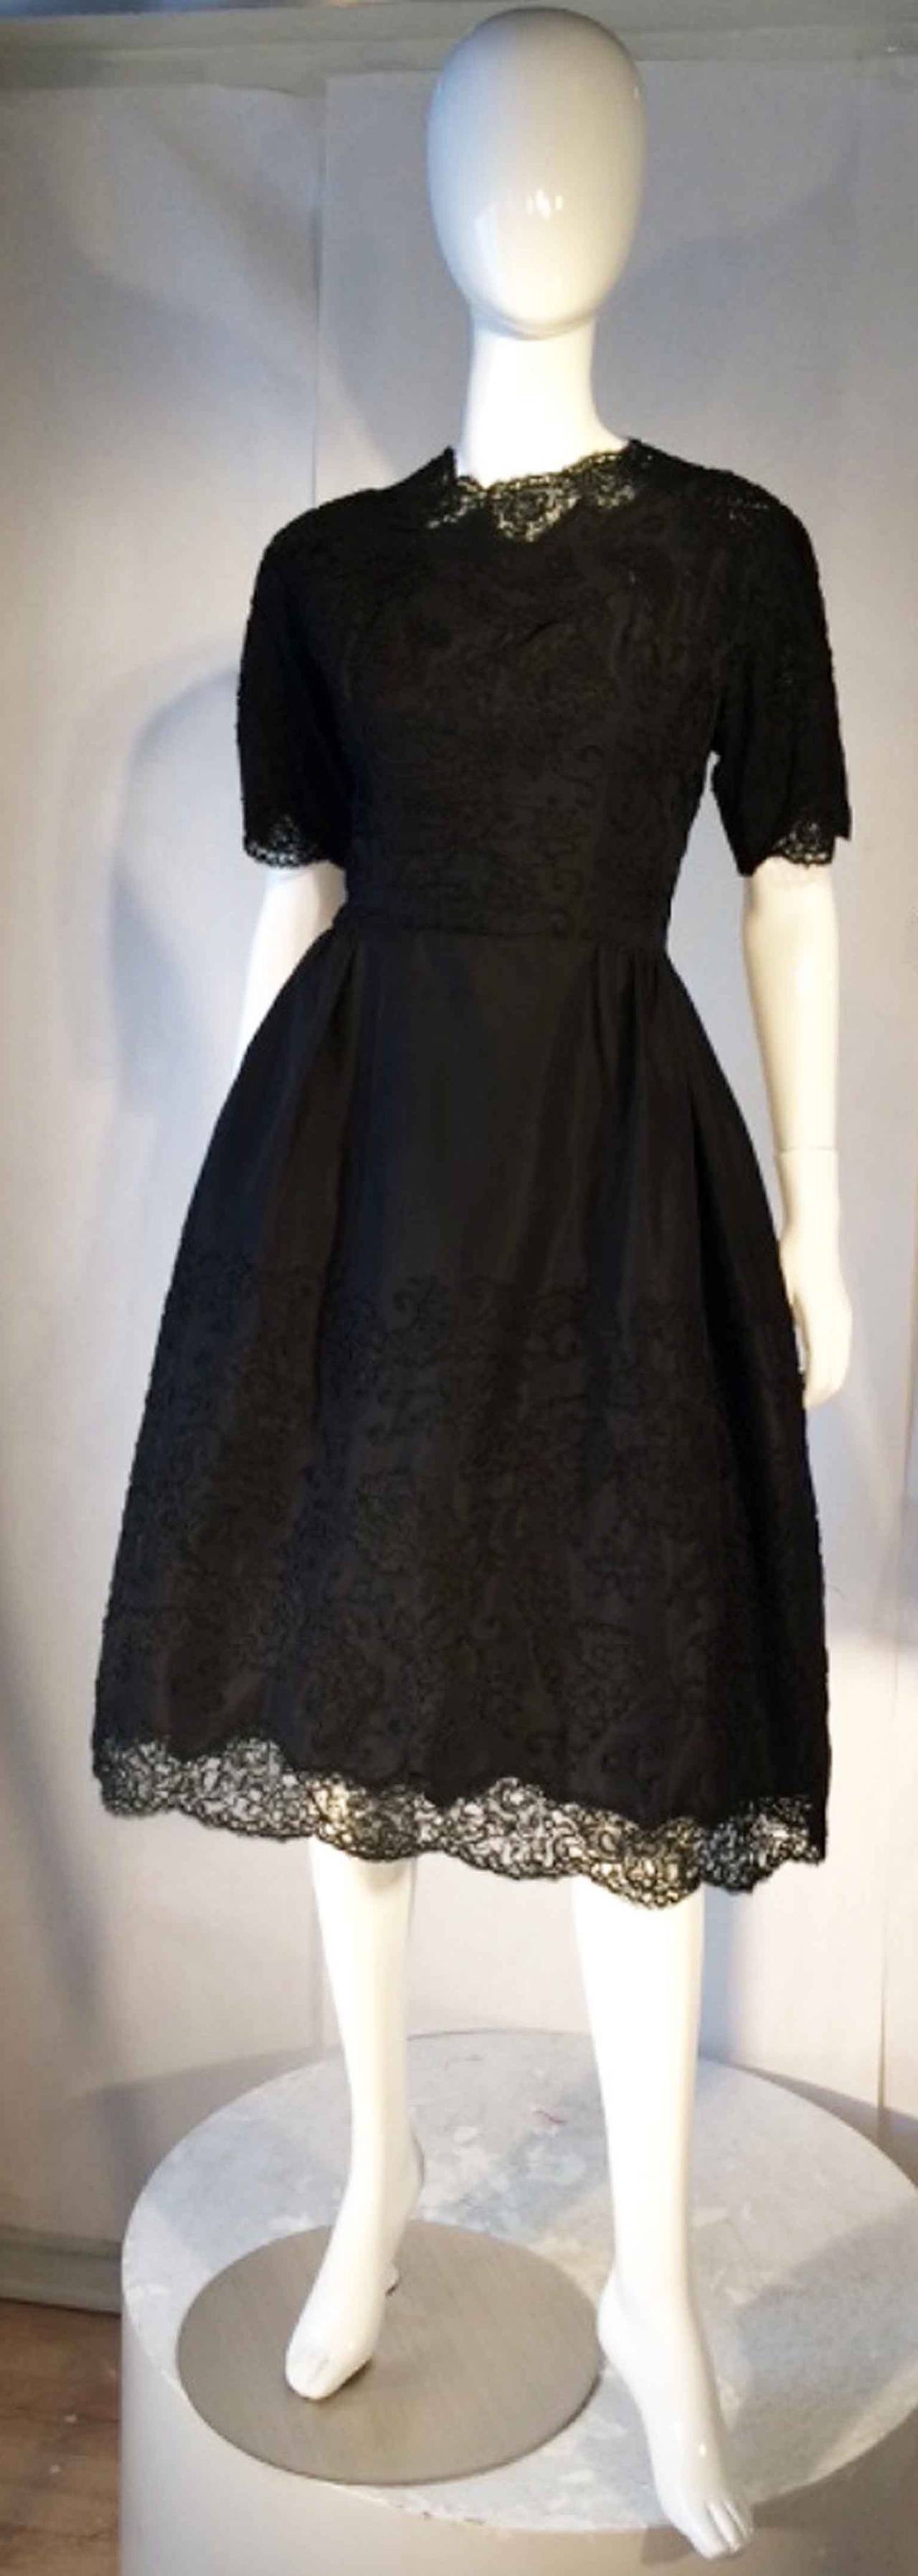 A fine and rare Sophie Gimbel couture cocktail dress. Hand constructed black silk faille item features matching black applique lace trim and hem. Item fully lined with a cinched waistline, boned bodice with metal zipper up back. Numbered Saks Fifth